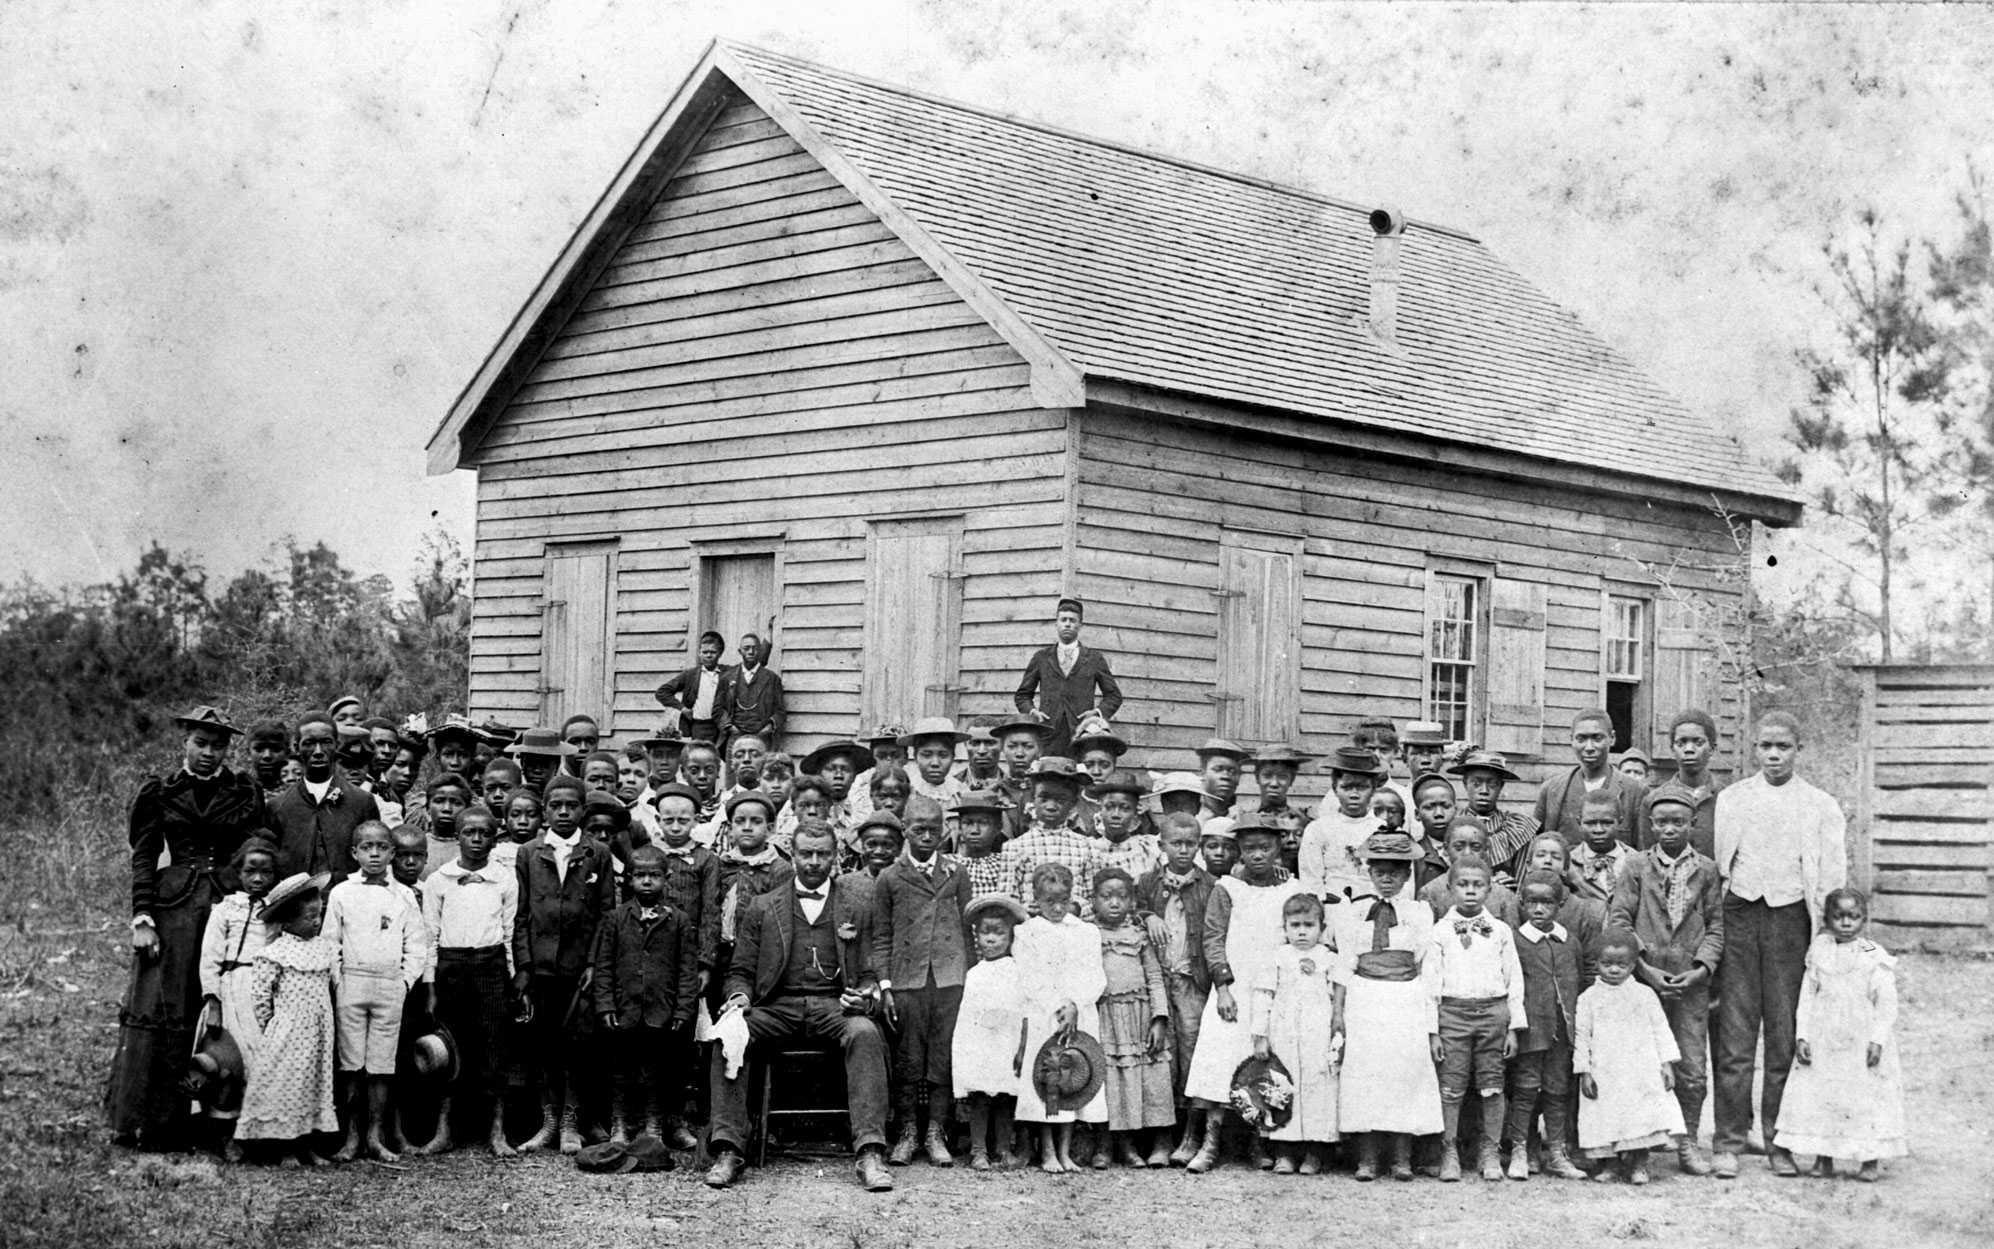 A group of African-American students and teacher stand in front of small log school.